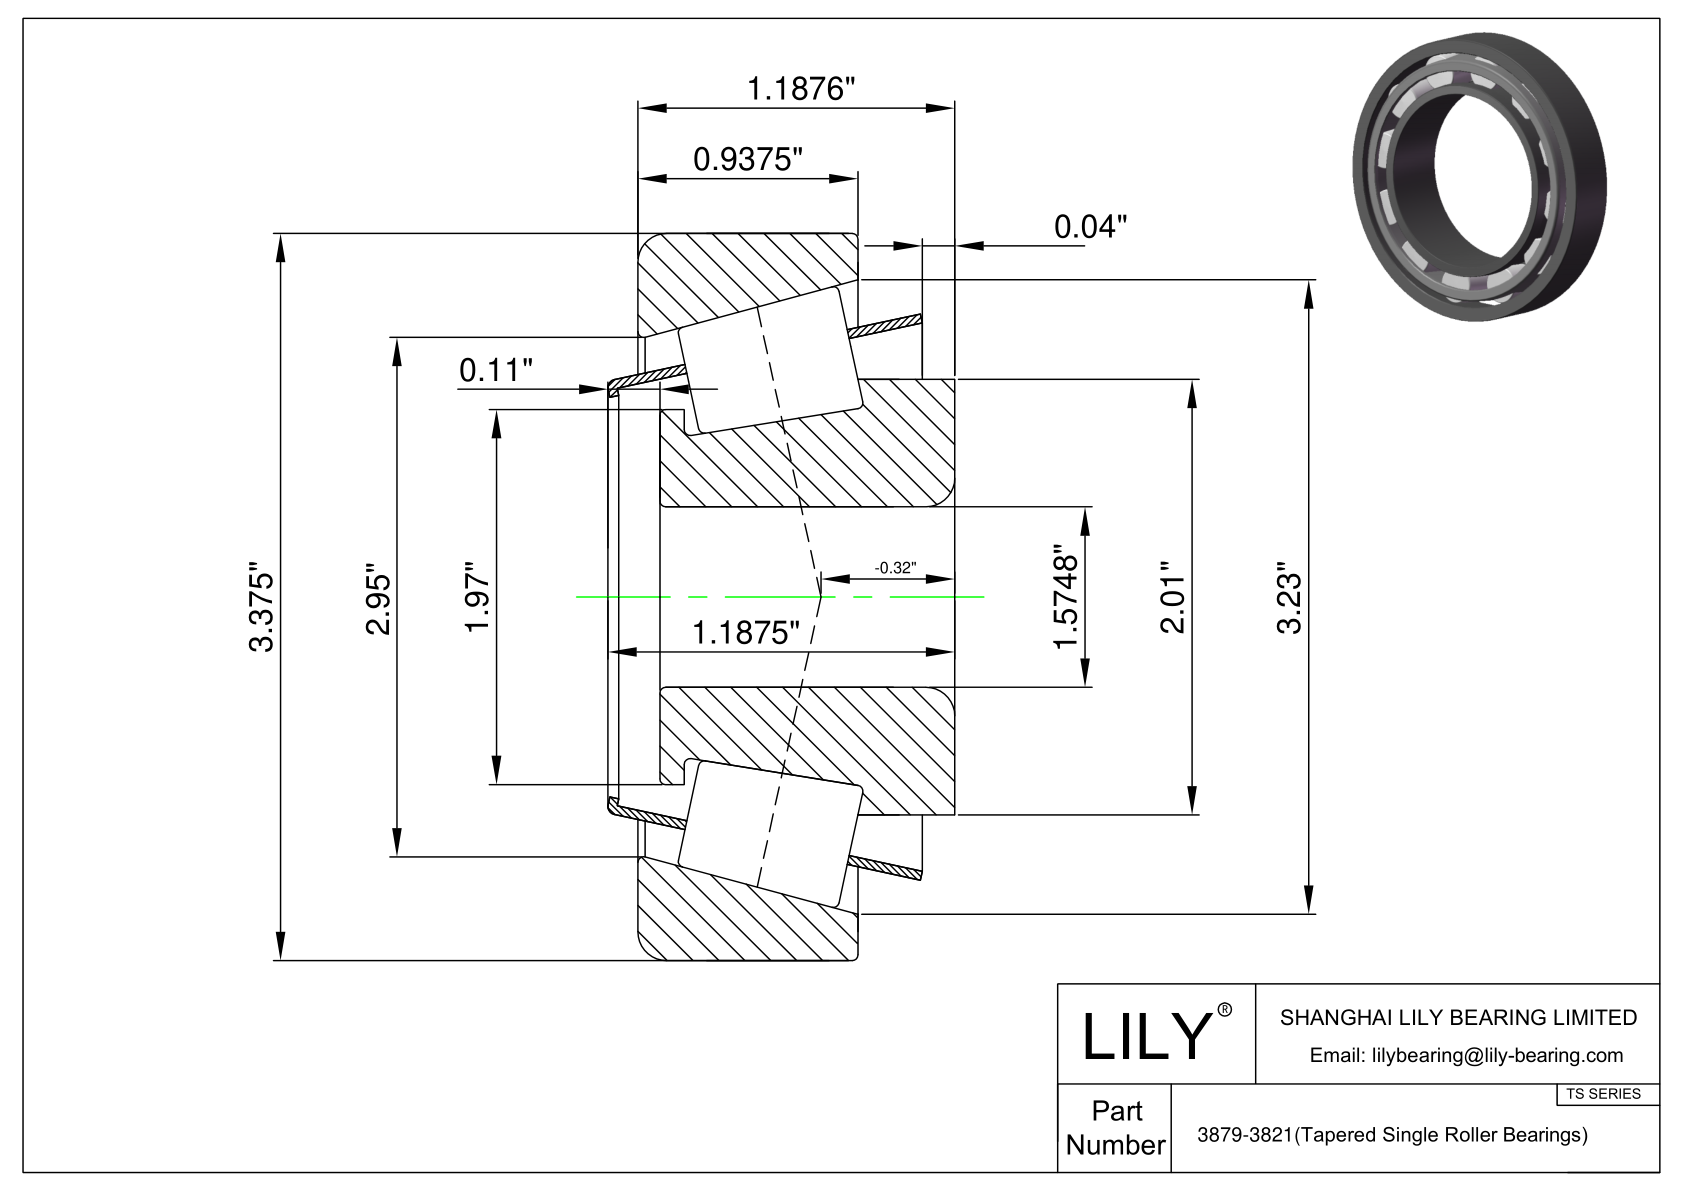 3879-3821 TS (Tapered Single Roller Bearings) (Imperial) cad drawing